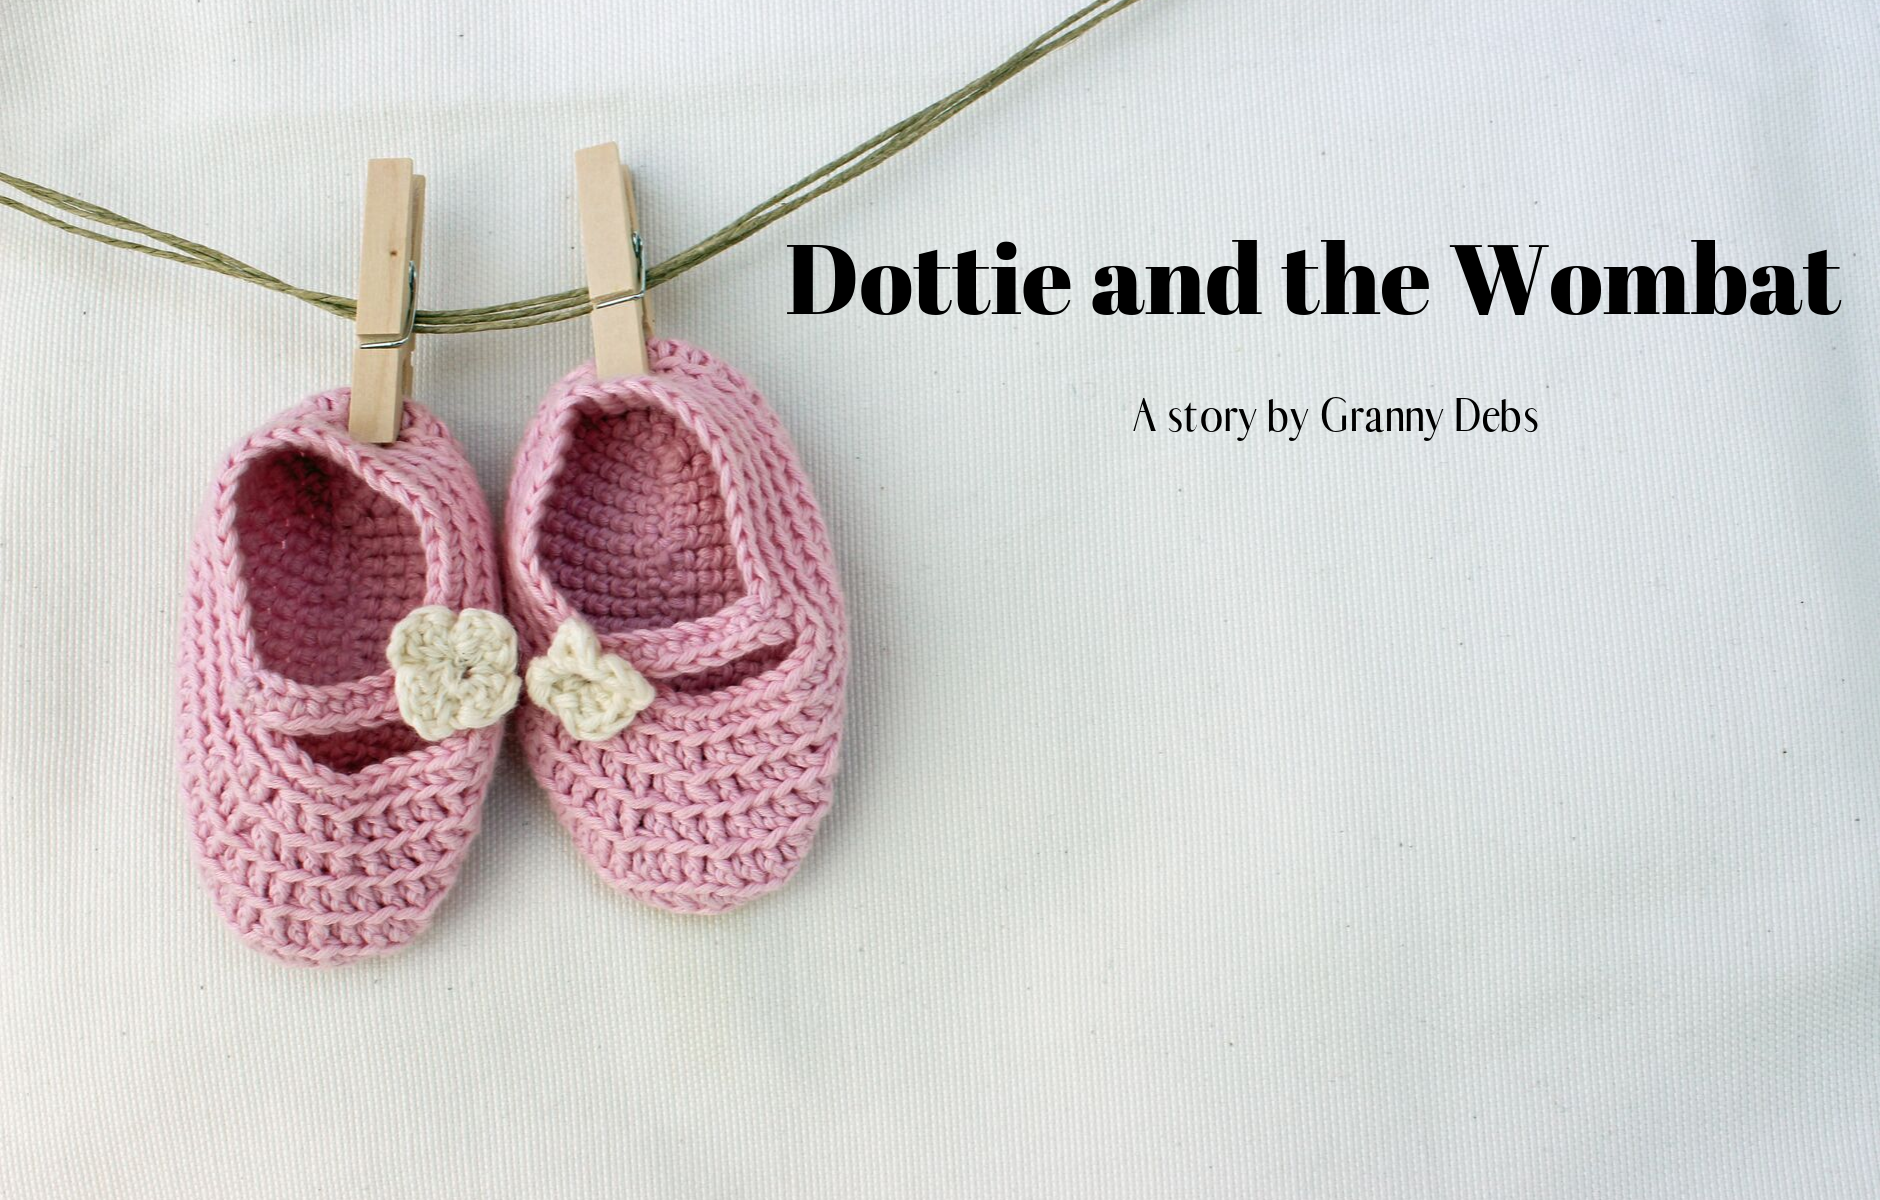 Dottie and the Wombat